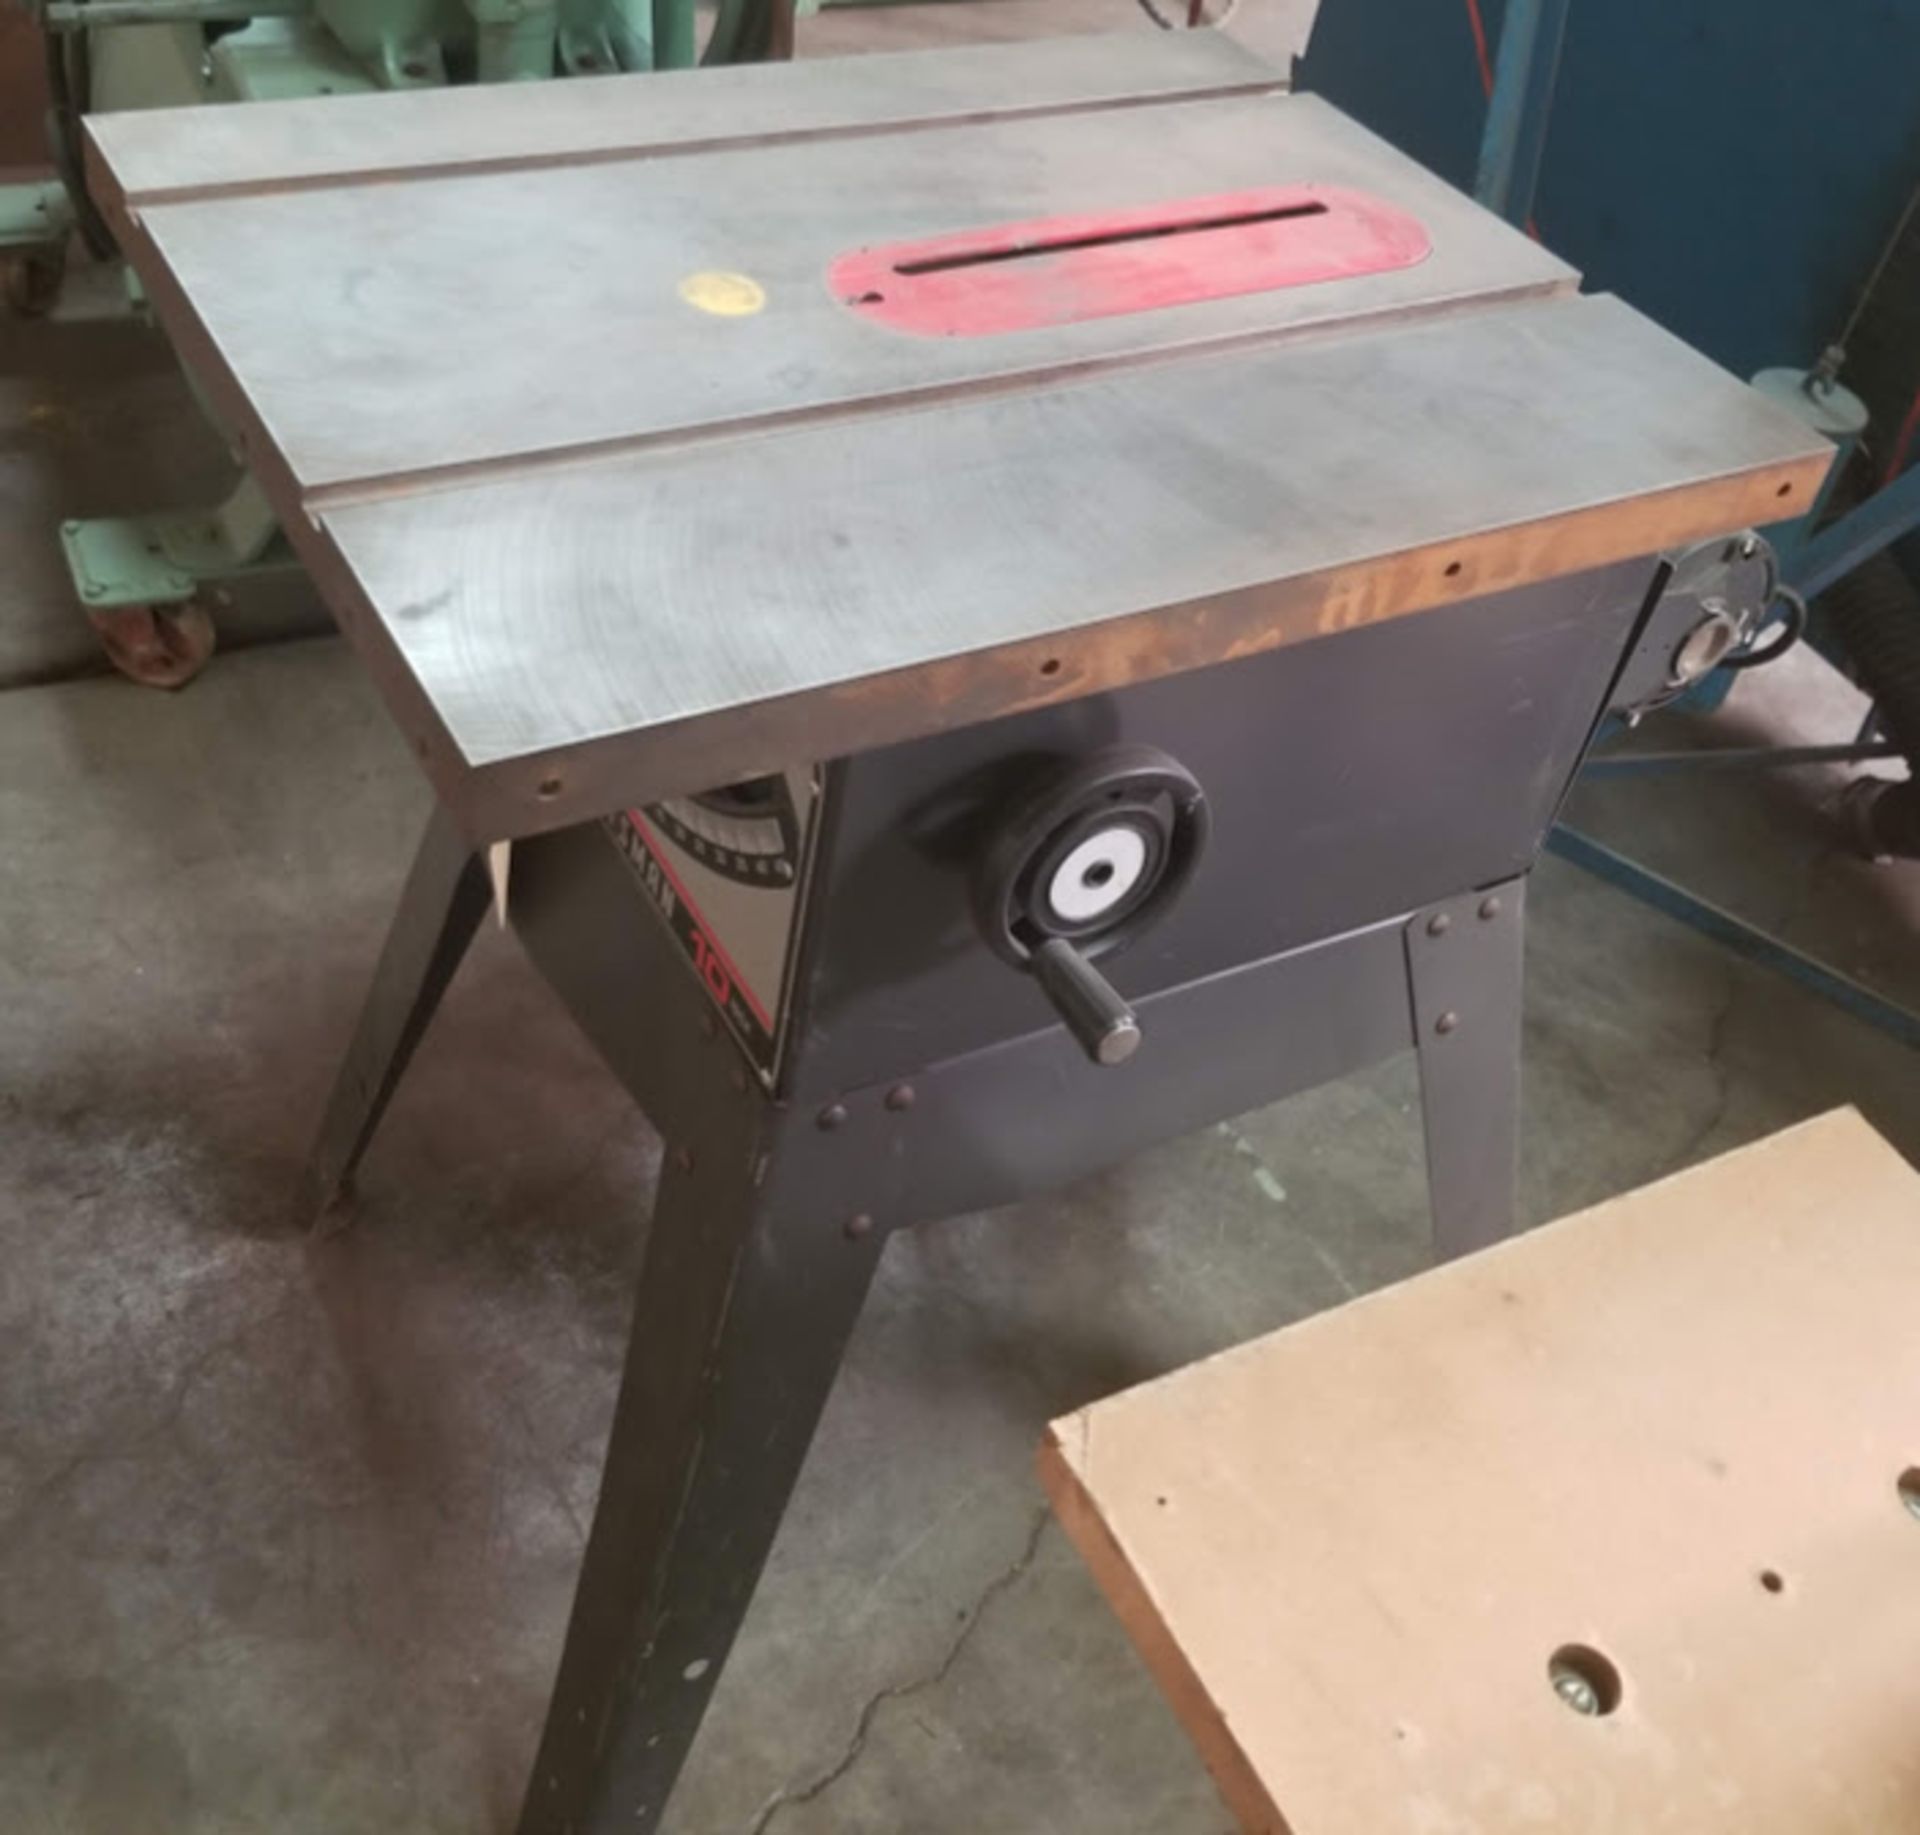 Sears Craftsman 10" Table Saw, 115 Volts Motor Cast Iron Table Top - Image 5 of 5